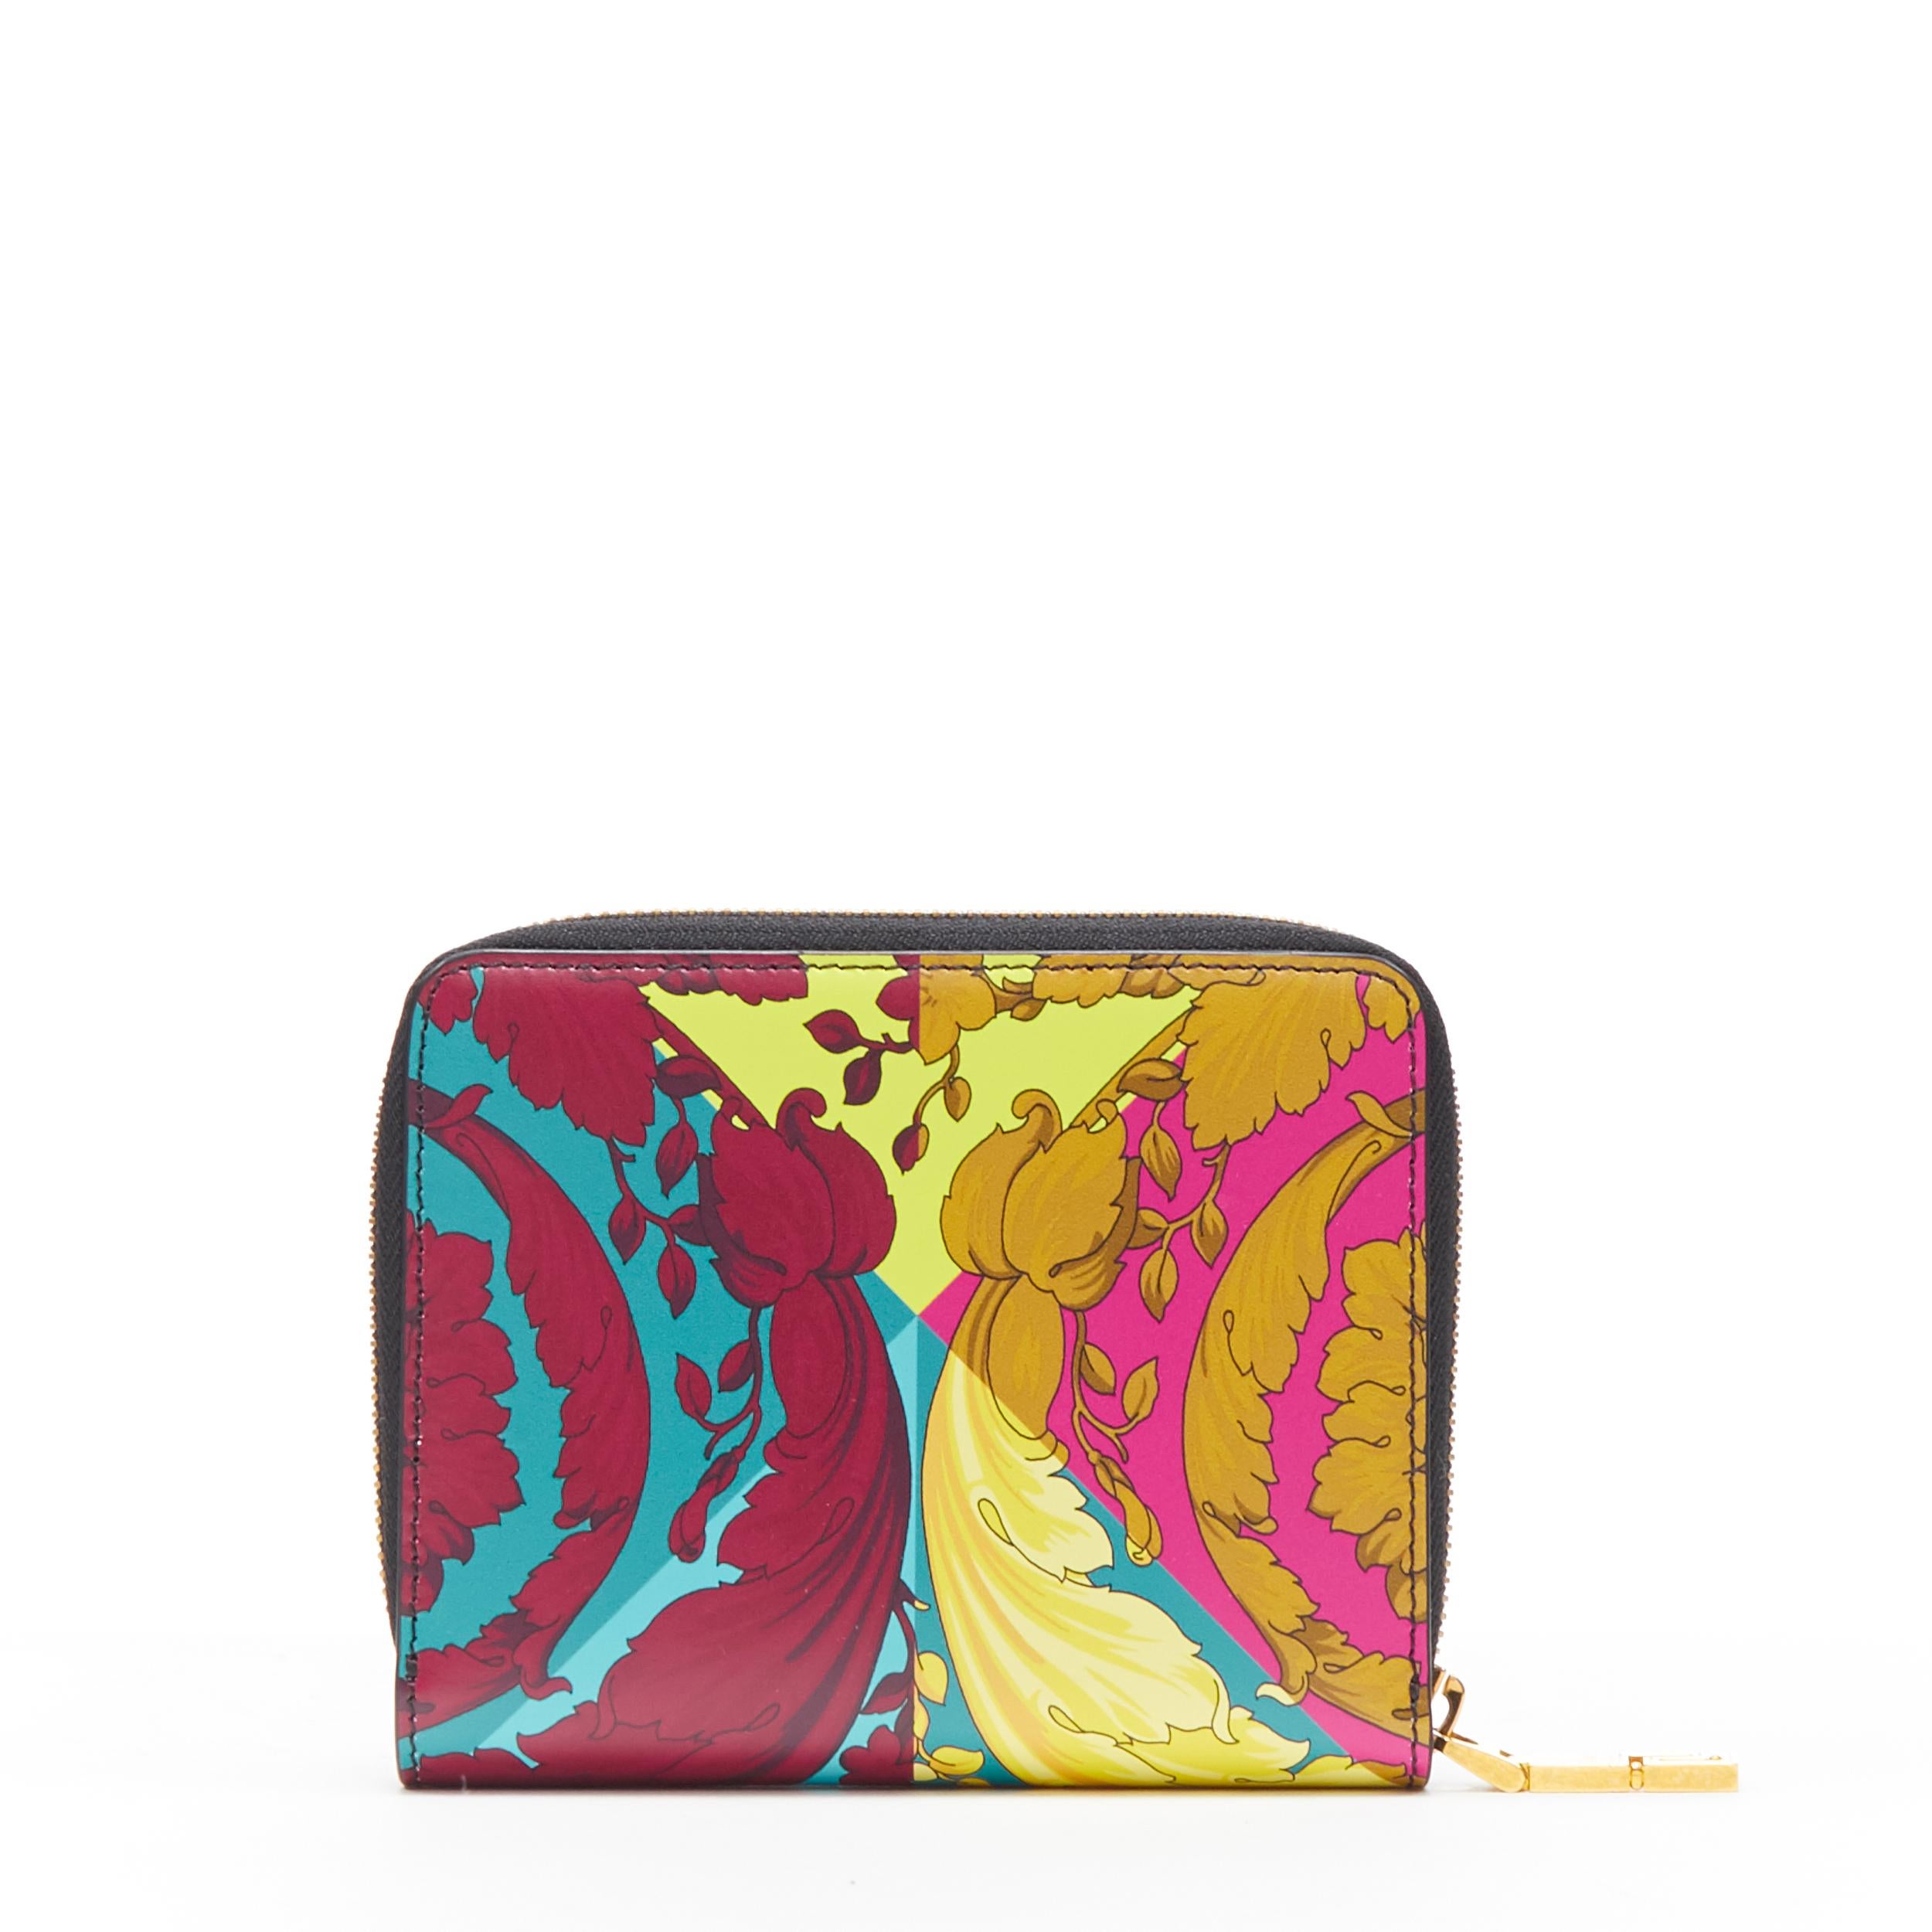 new VERSACE Techni Baroque print leather gold Medusa face zip around wallet 
Brand: Versace
Designer: Donatella Versace
Collection: 2019
Model Name / Style: Zip around wallet
Material: Leather
Color: Multicolour
Pattern: Floral
Closure: Zip
Extra